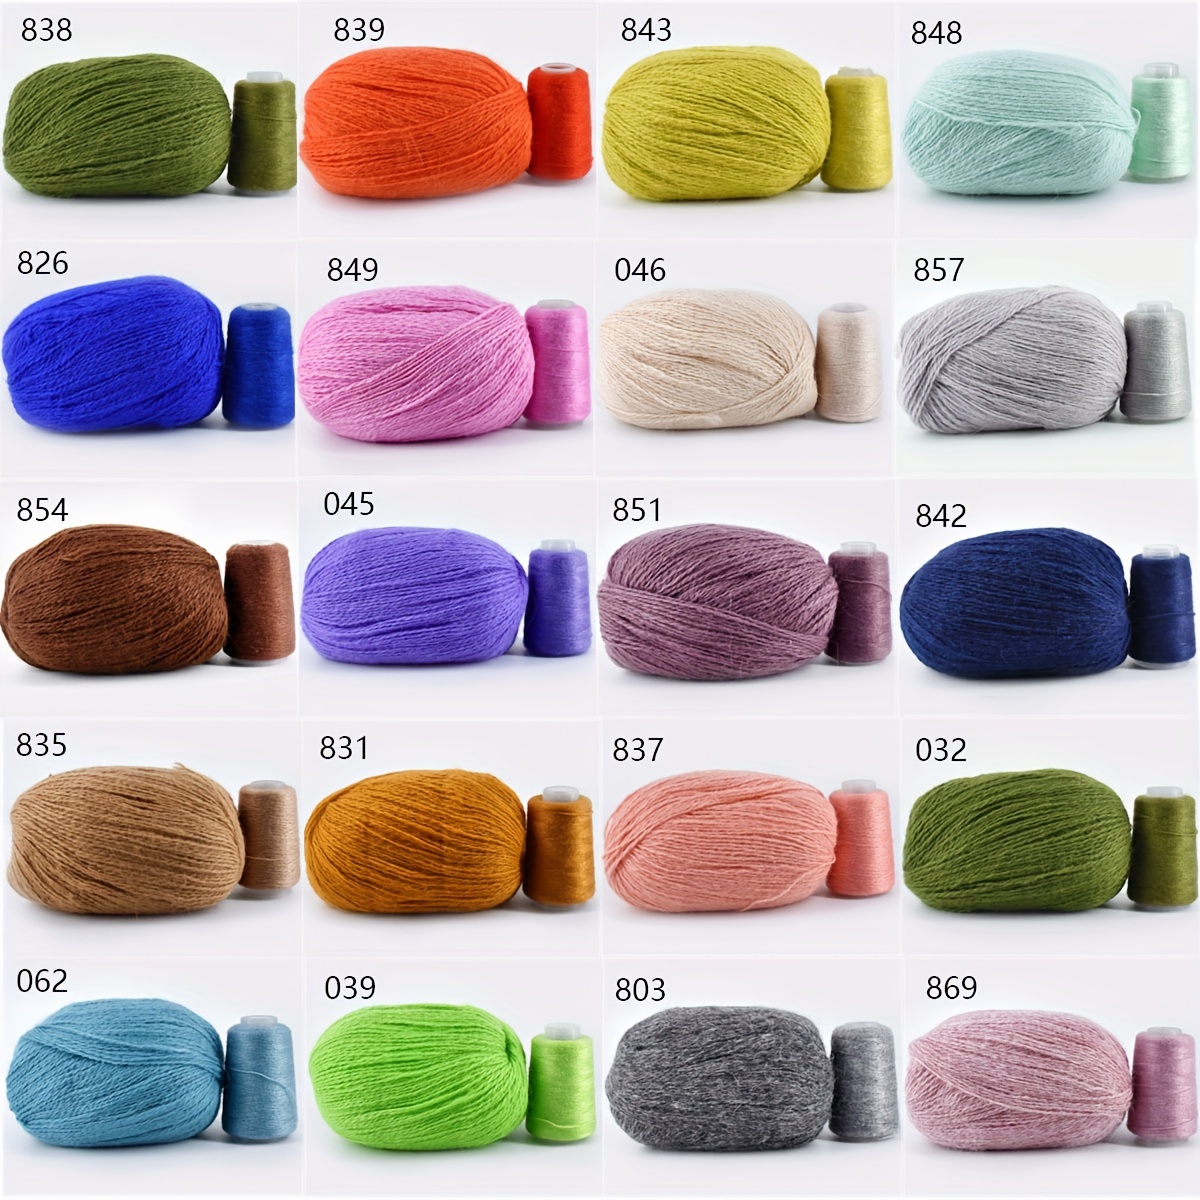 Soft Merino Wool Yarn for Hand Knitting - Medium-Fine Thread for Warm  Clothes, Scarves, and Crochet Projects - Ideal for Autumn and Winter (Color  